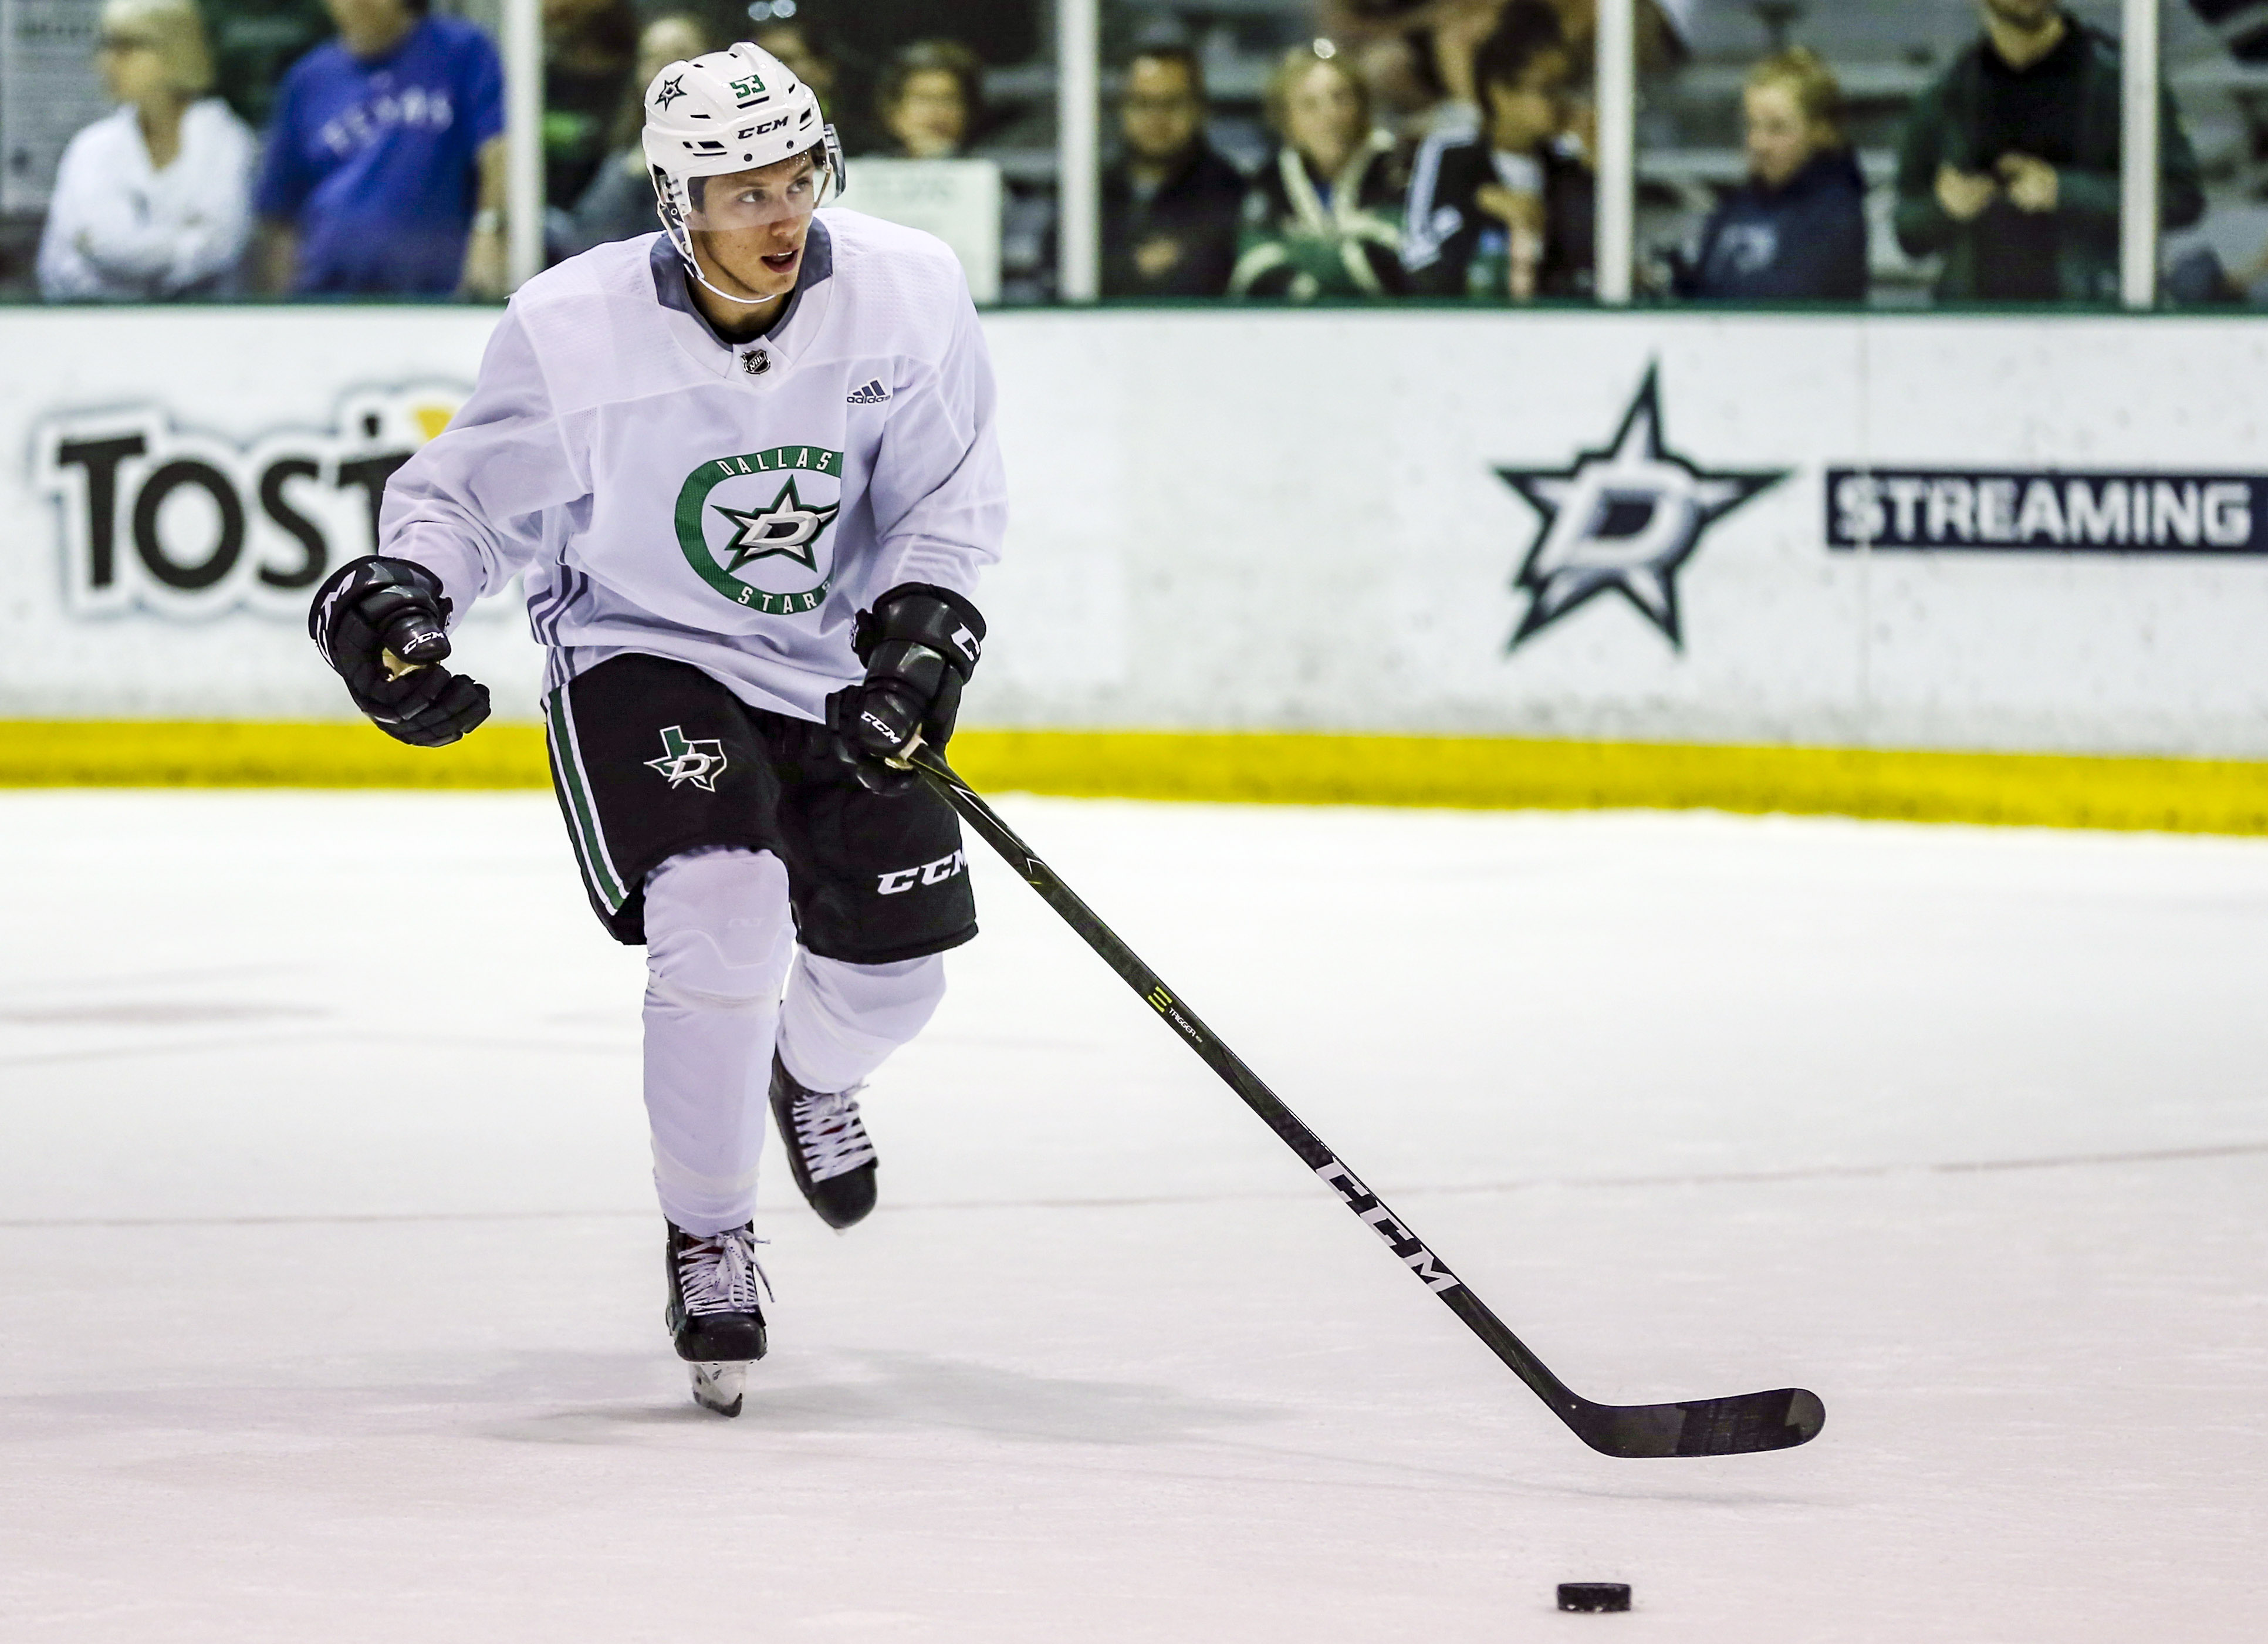 Riley Damiani started his AHL career with a bang, and the Dallas Stars have taken notice